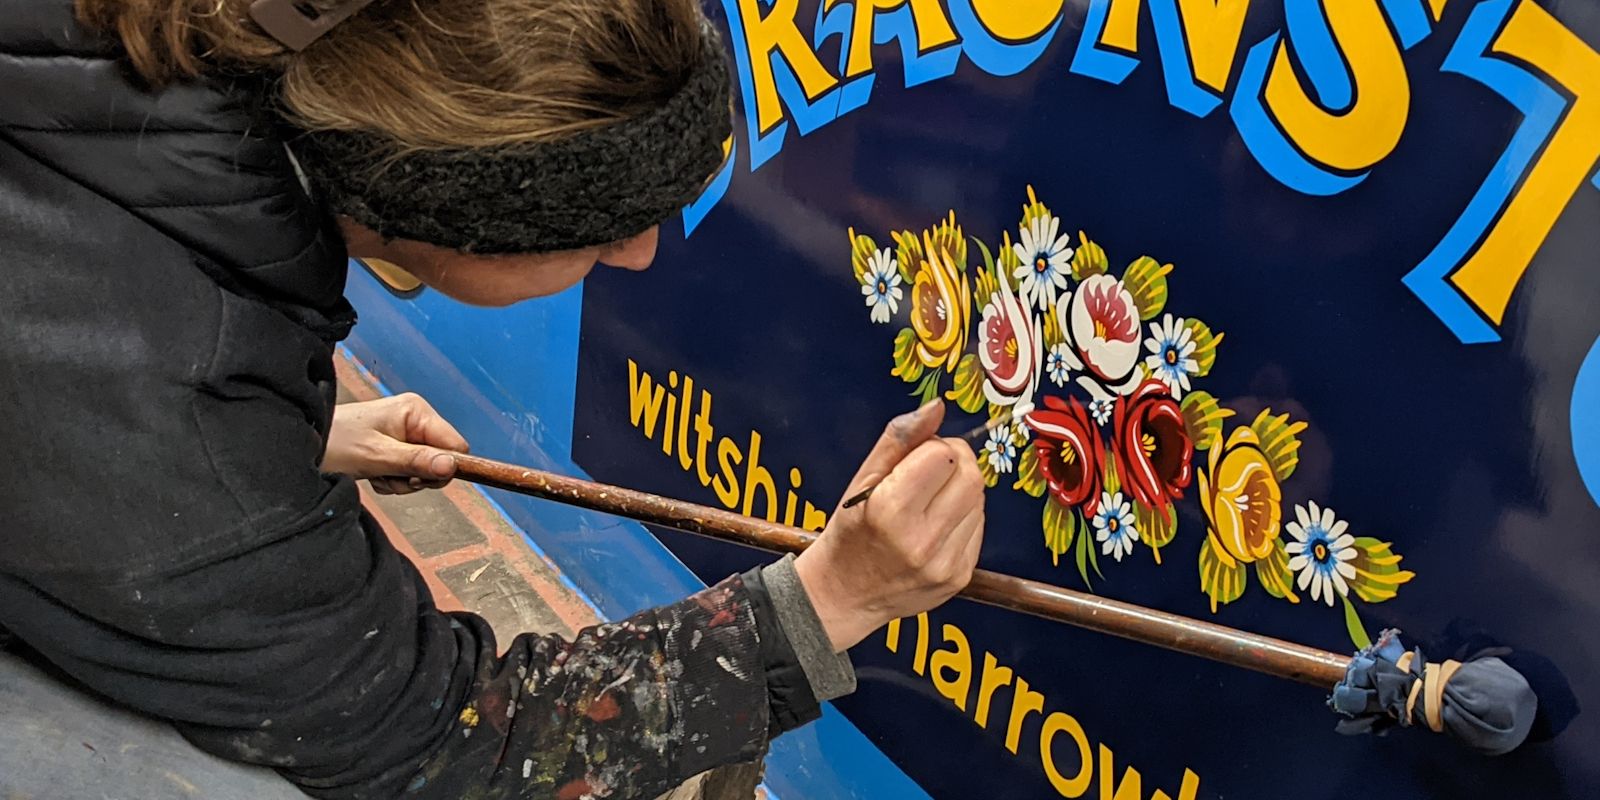 Signwriter resting their hand on a mahl stick while painting an arrangement of red, yellow, and white roses.